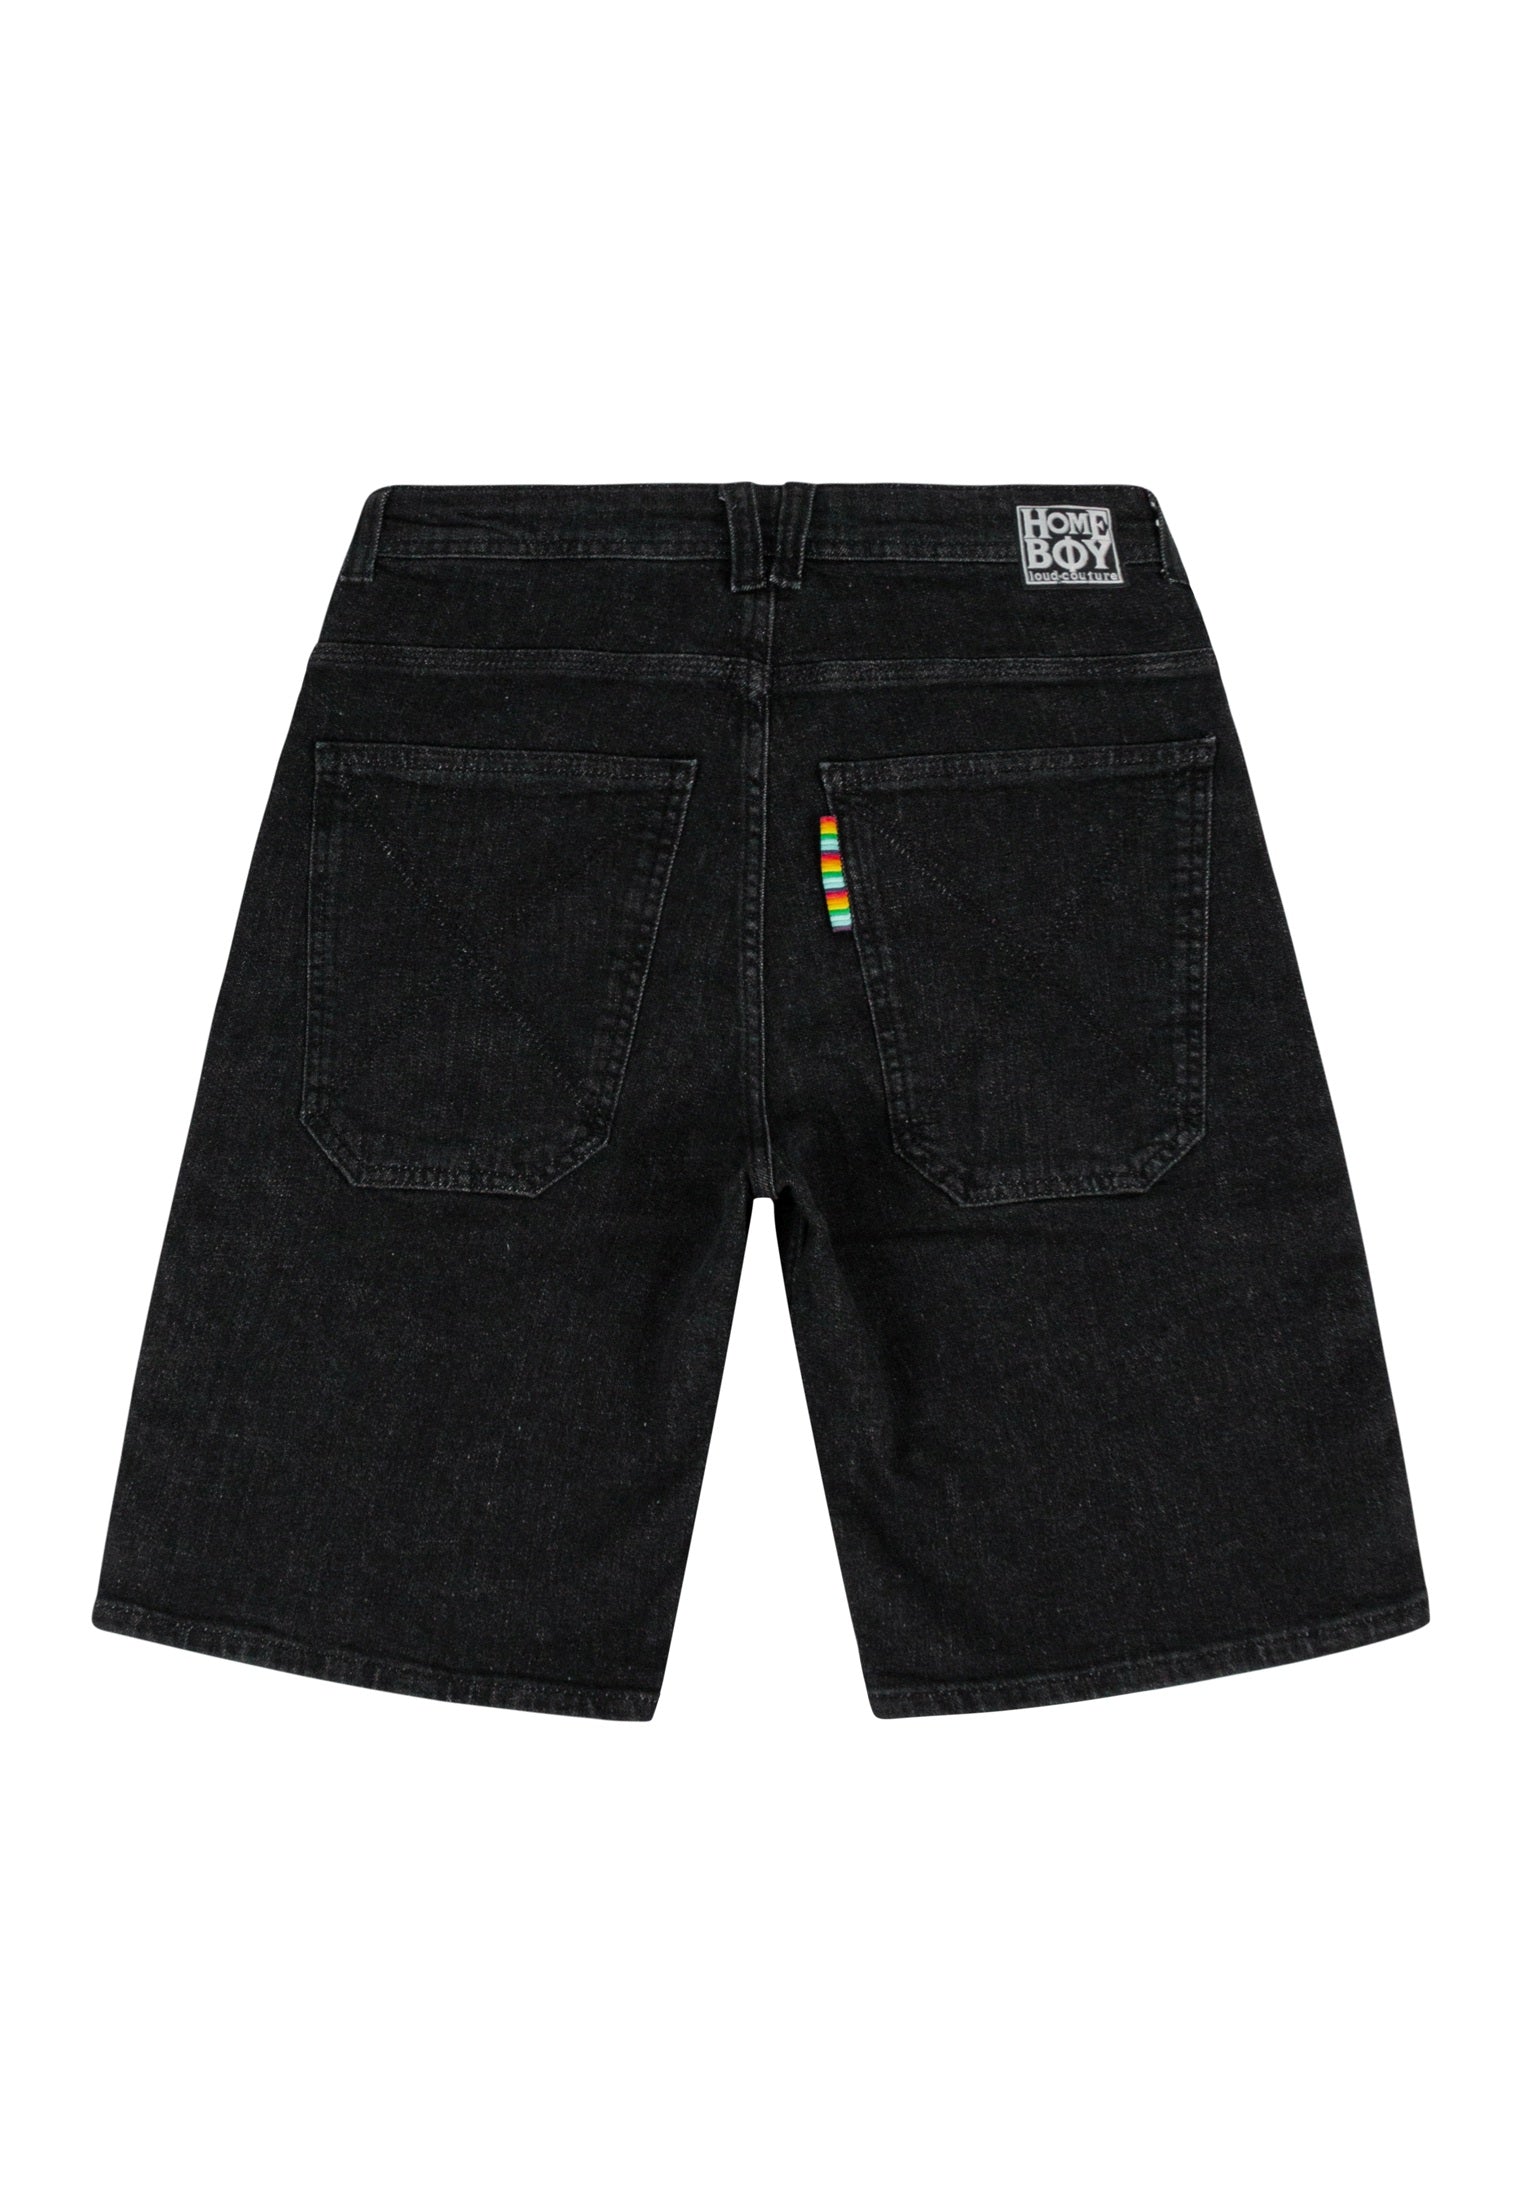 HOMEBOY x-tra BAGGY Shorts Washed Black – Homeboy